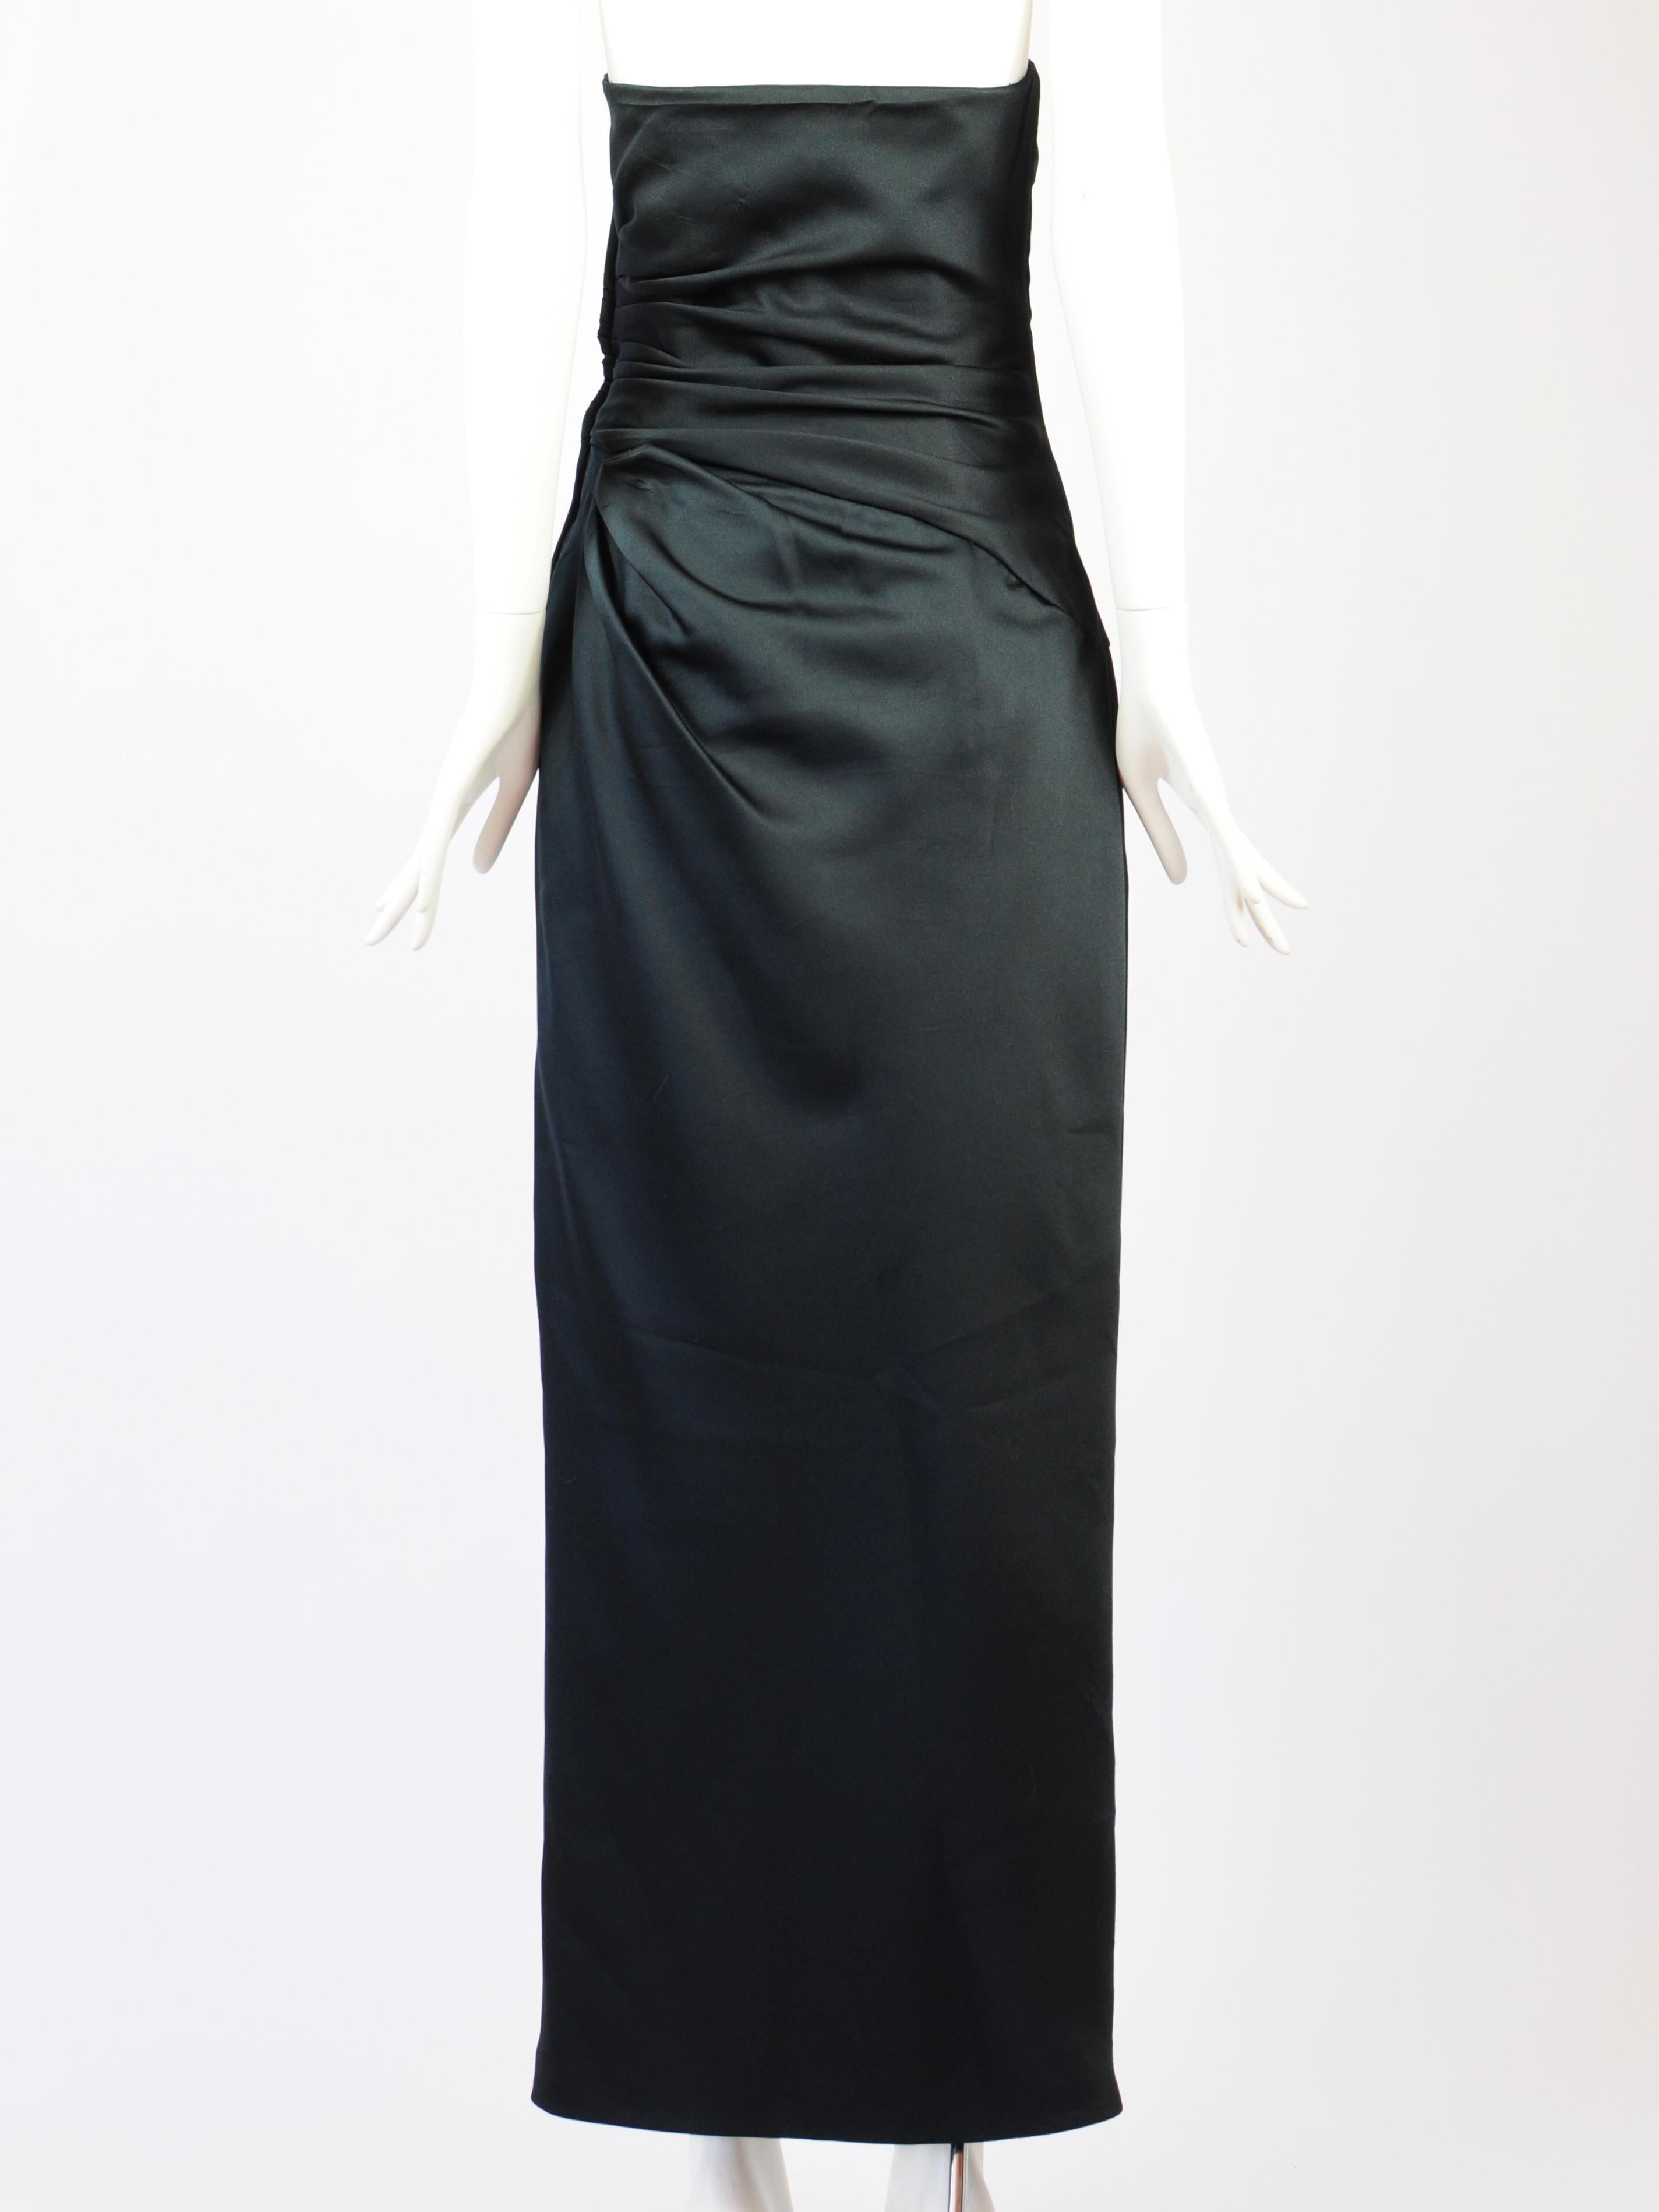 Victor Costa Black Dress Strapless Structured Draped Satin 1980s For Sale 1